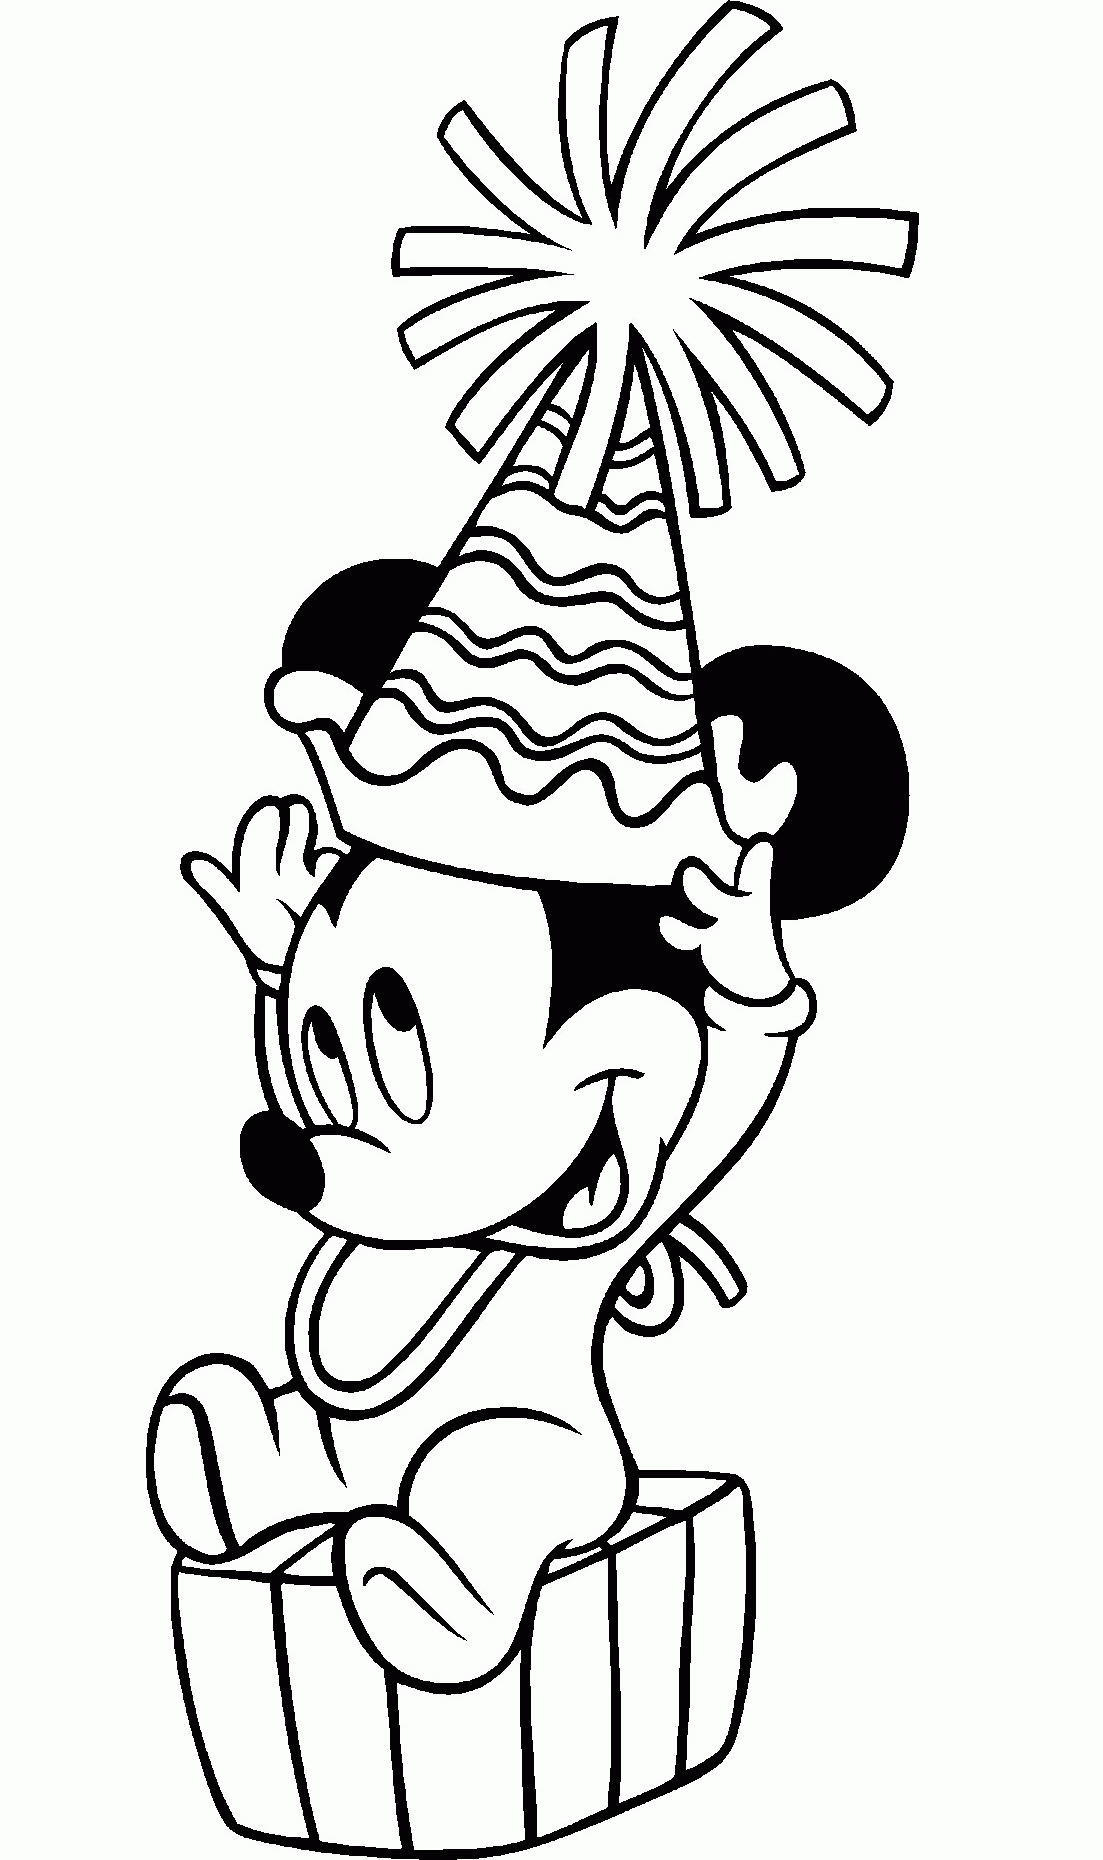 Free Baby Minnie Mouse Coloring Pages Coloring Pages Coloring Pages Mickey Mouse Minnie And Paper